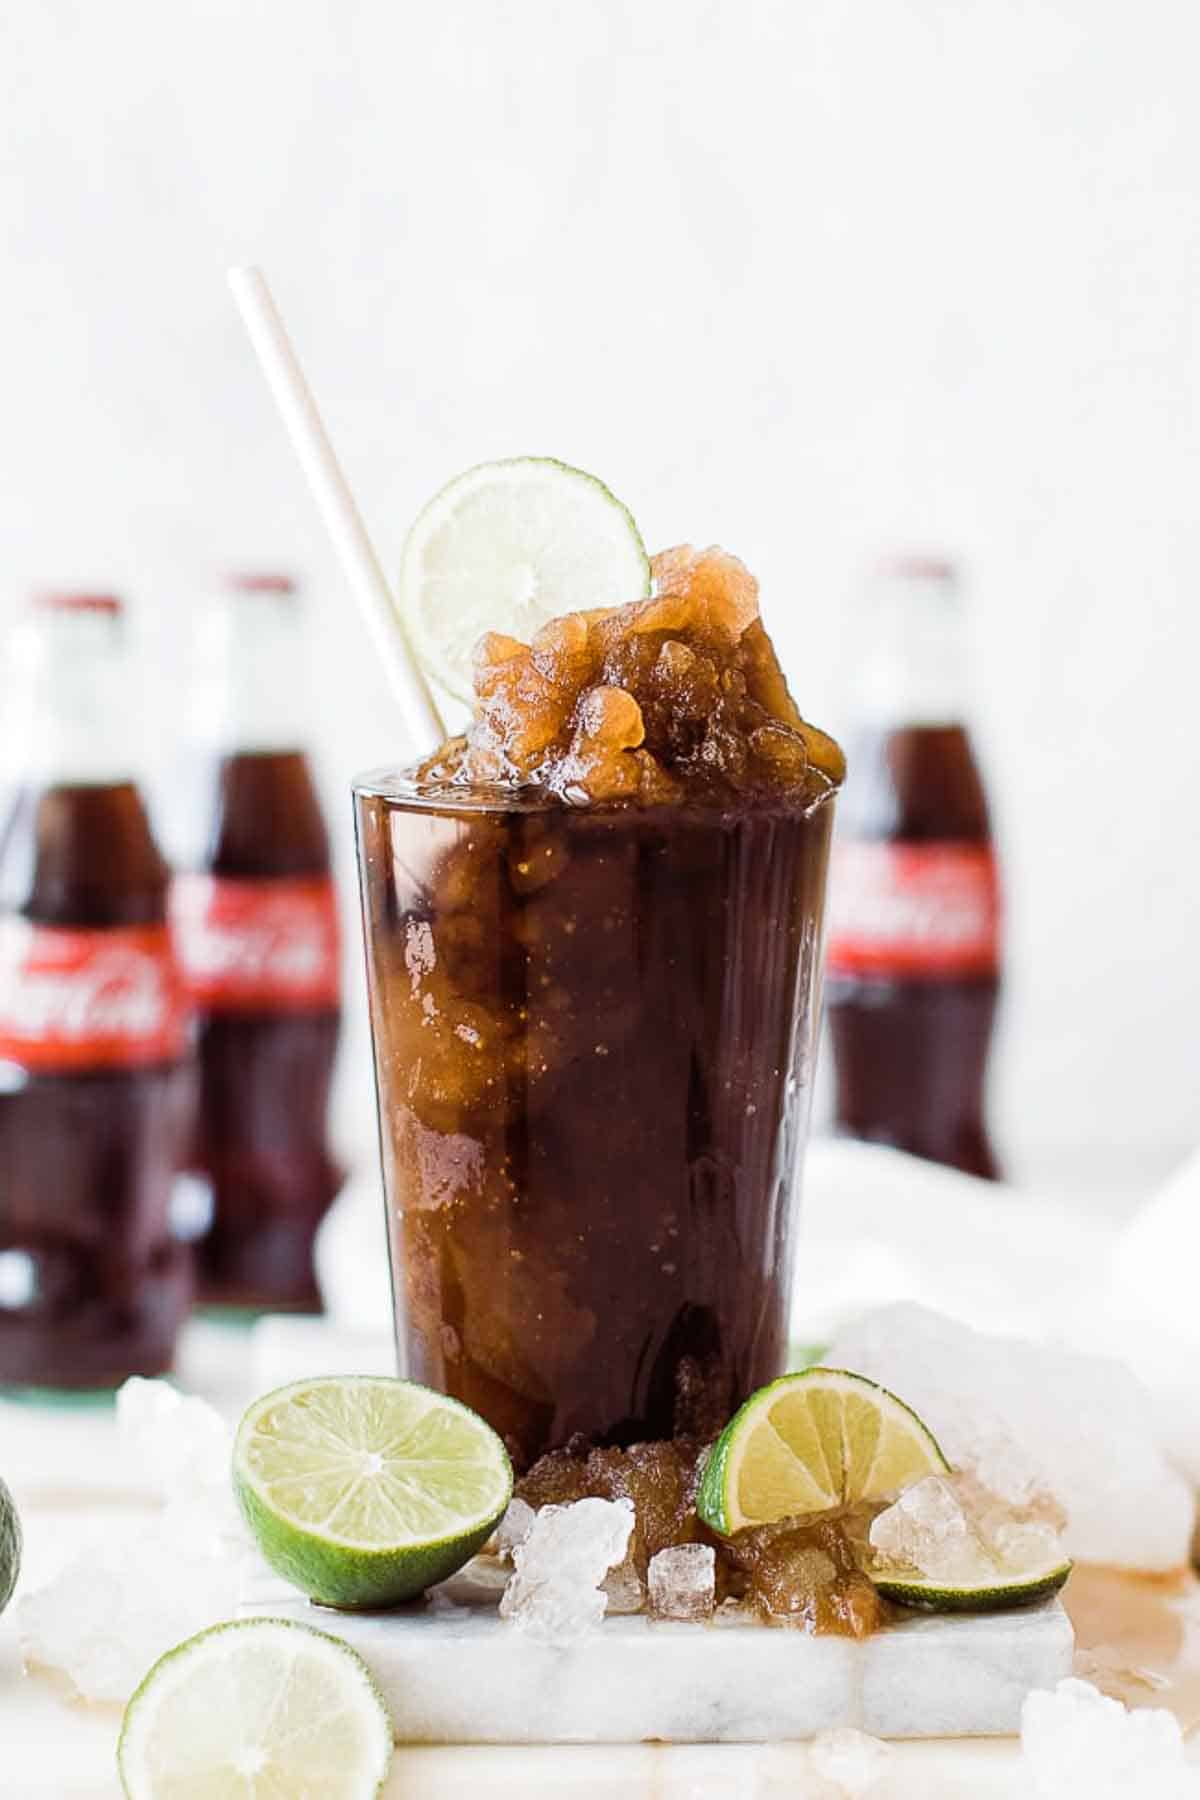 A glass of copycat Coke slurpee on the table with crushed ice and limes and bottles of Coke in the background.